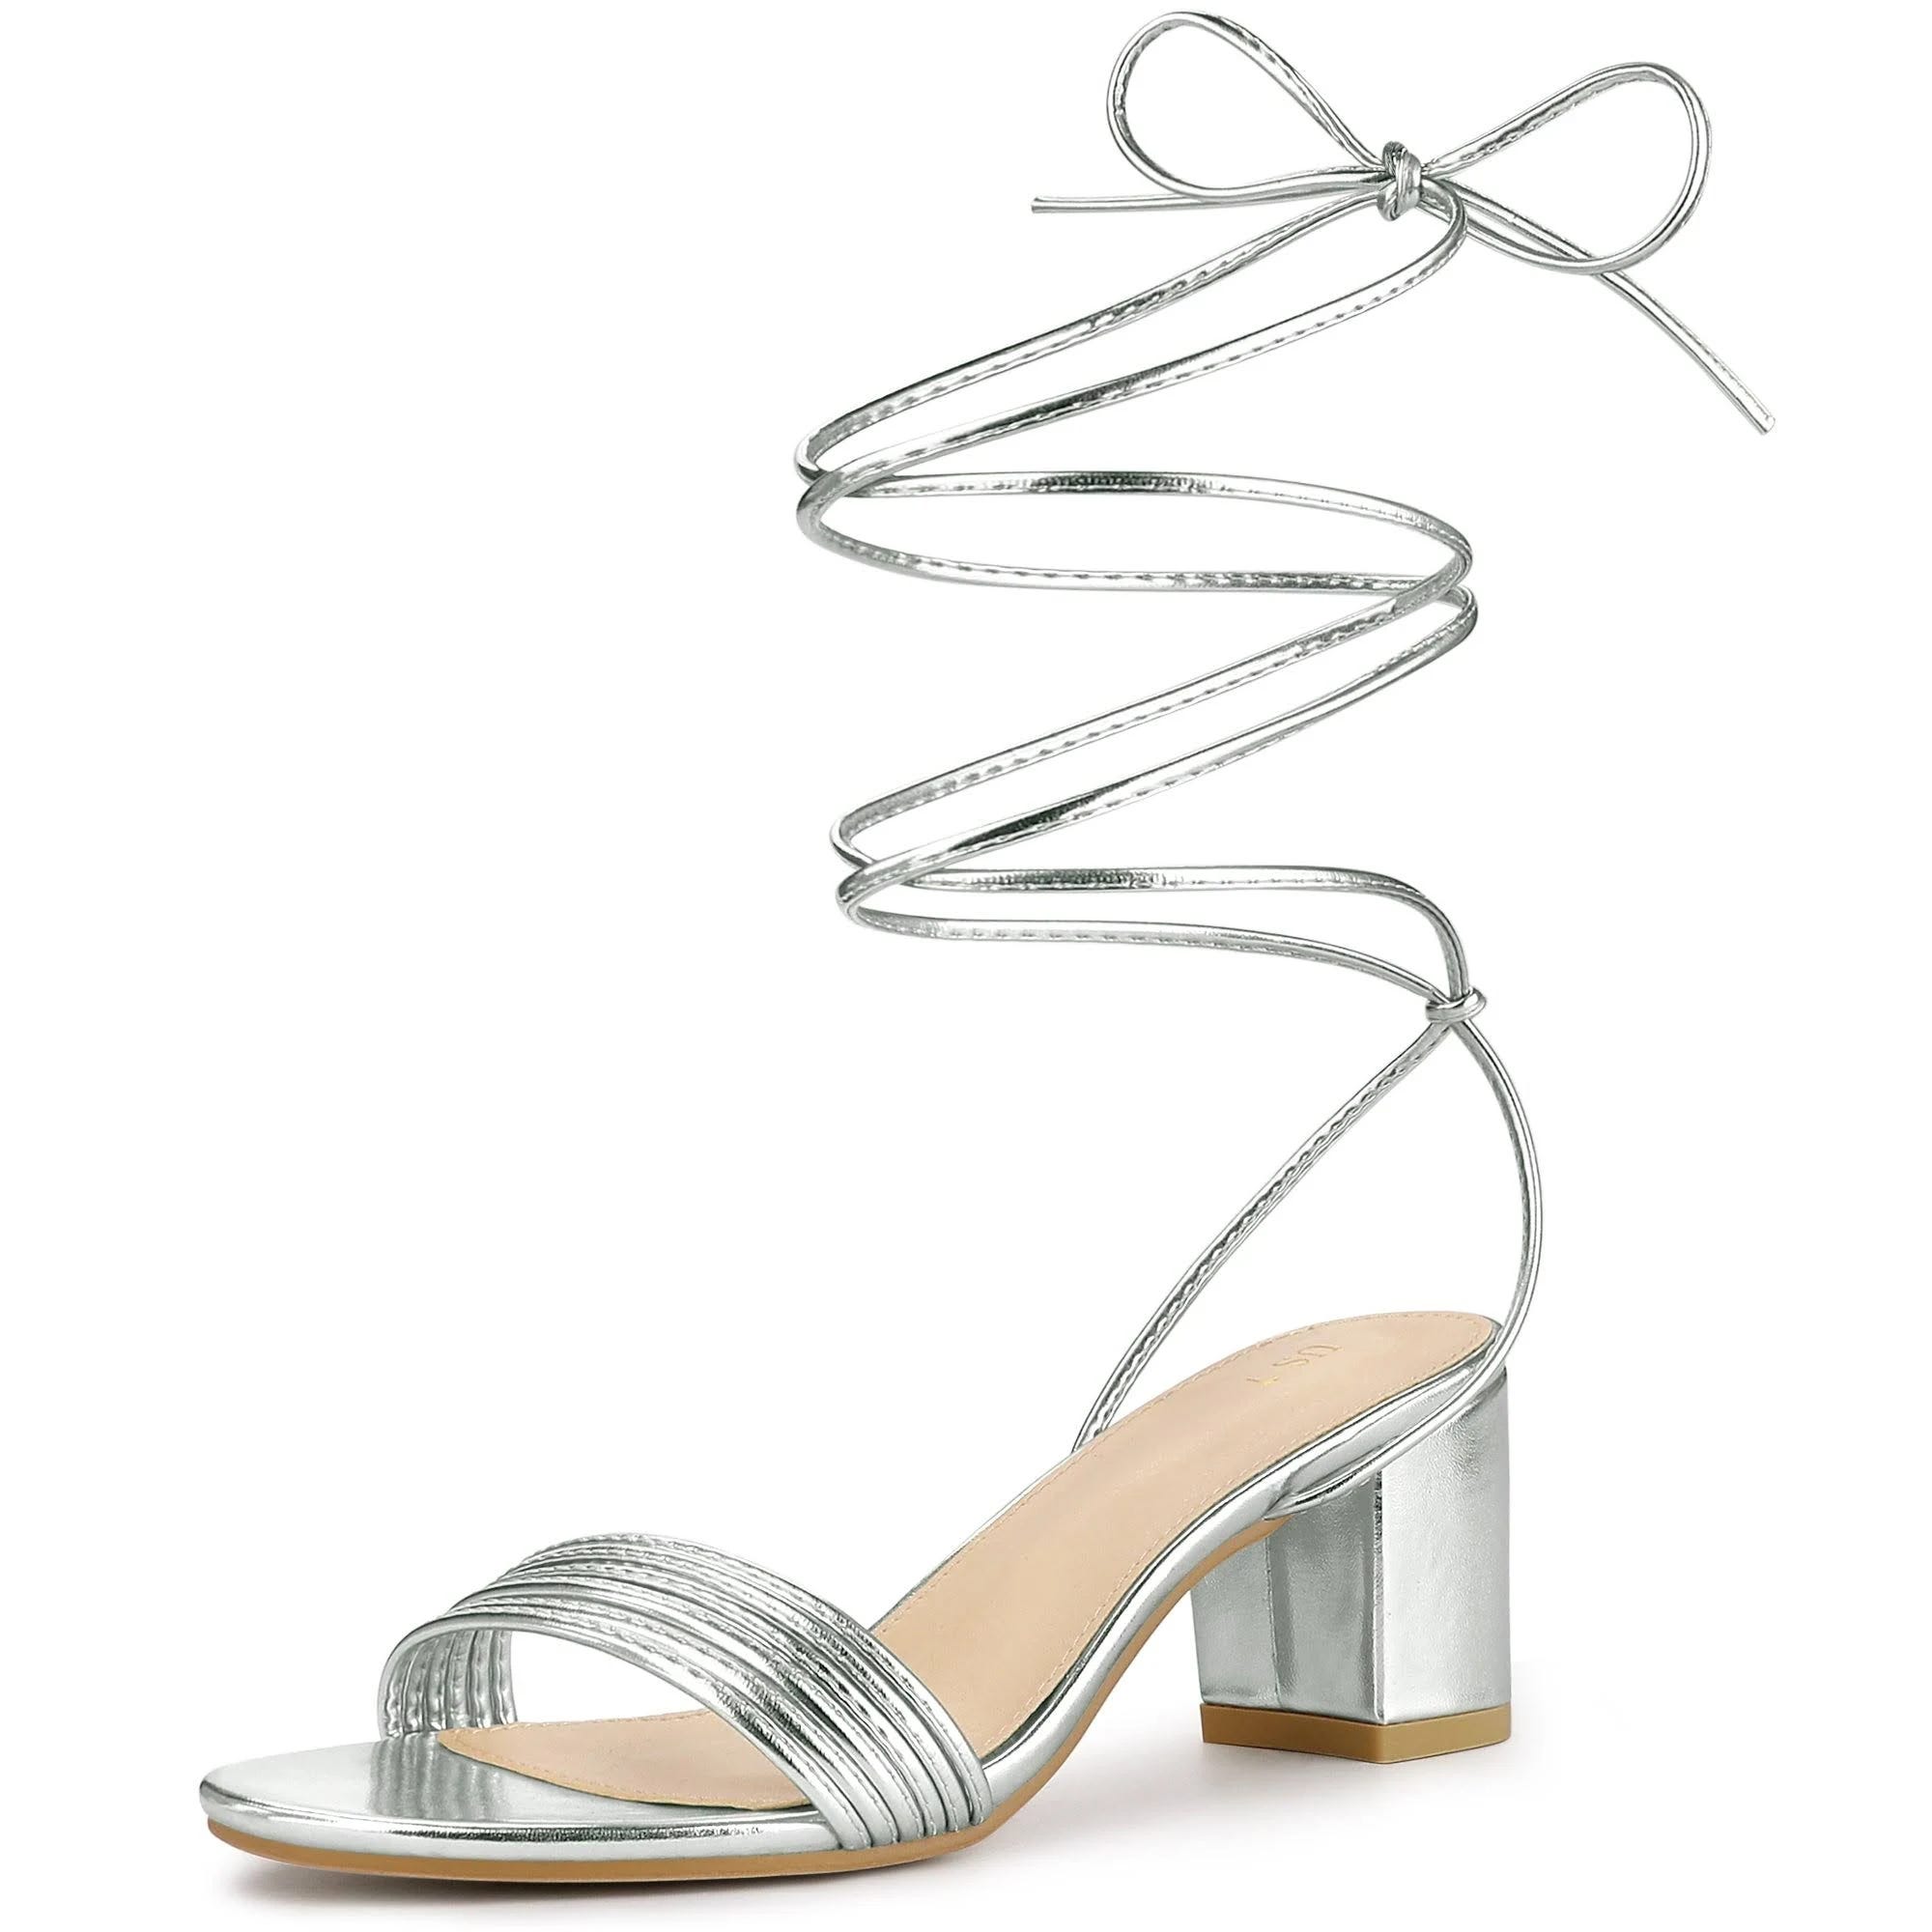 Silver Sparkle Strappy Lace Up Heels with Adjustable Straps | Image